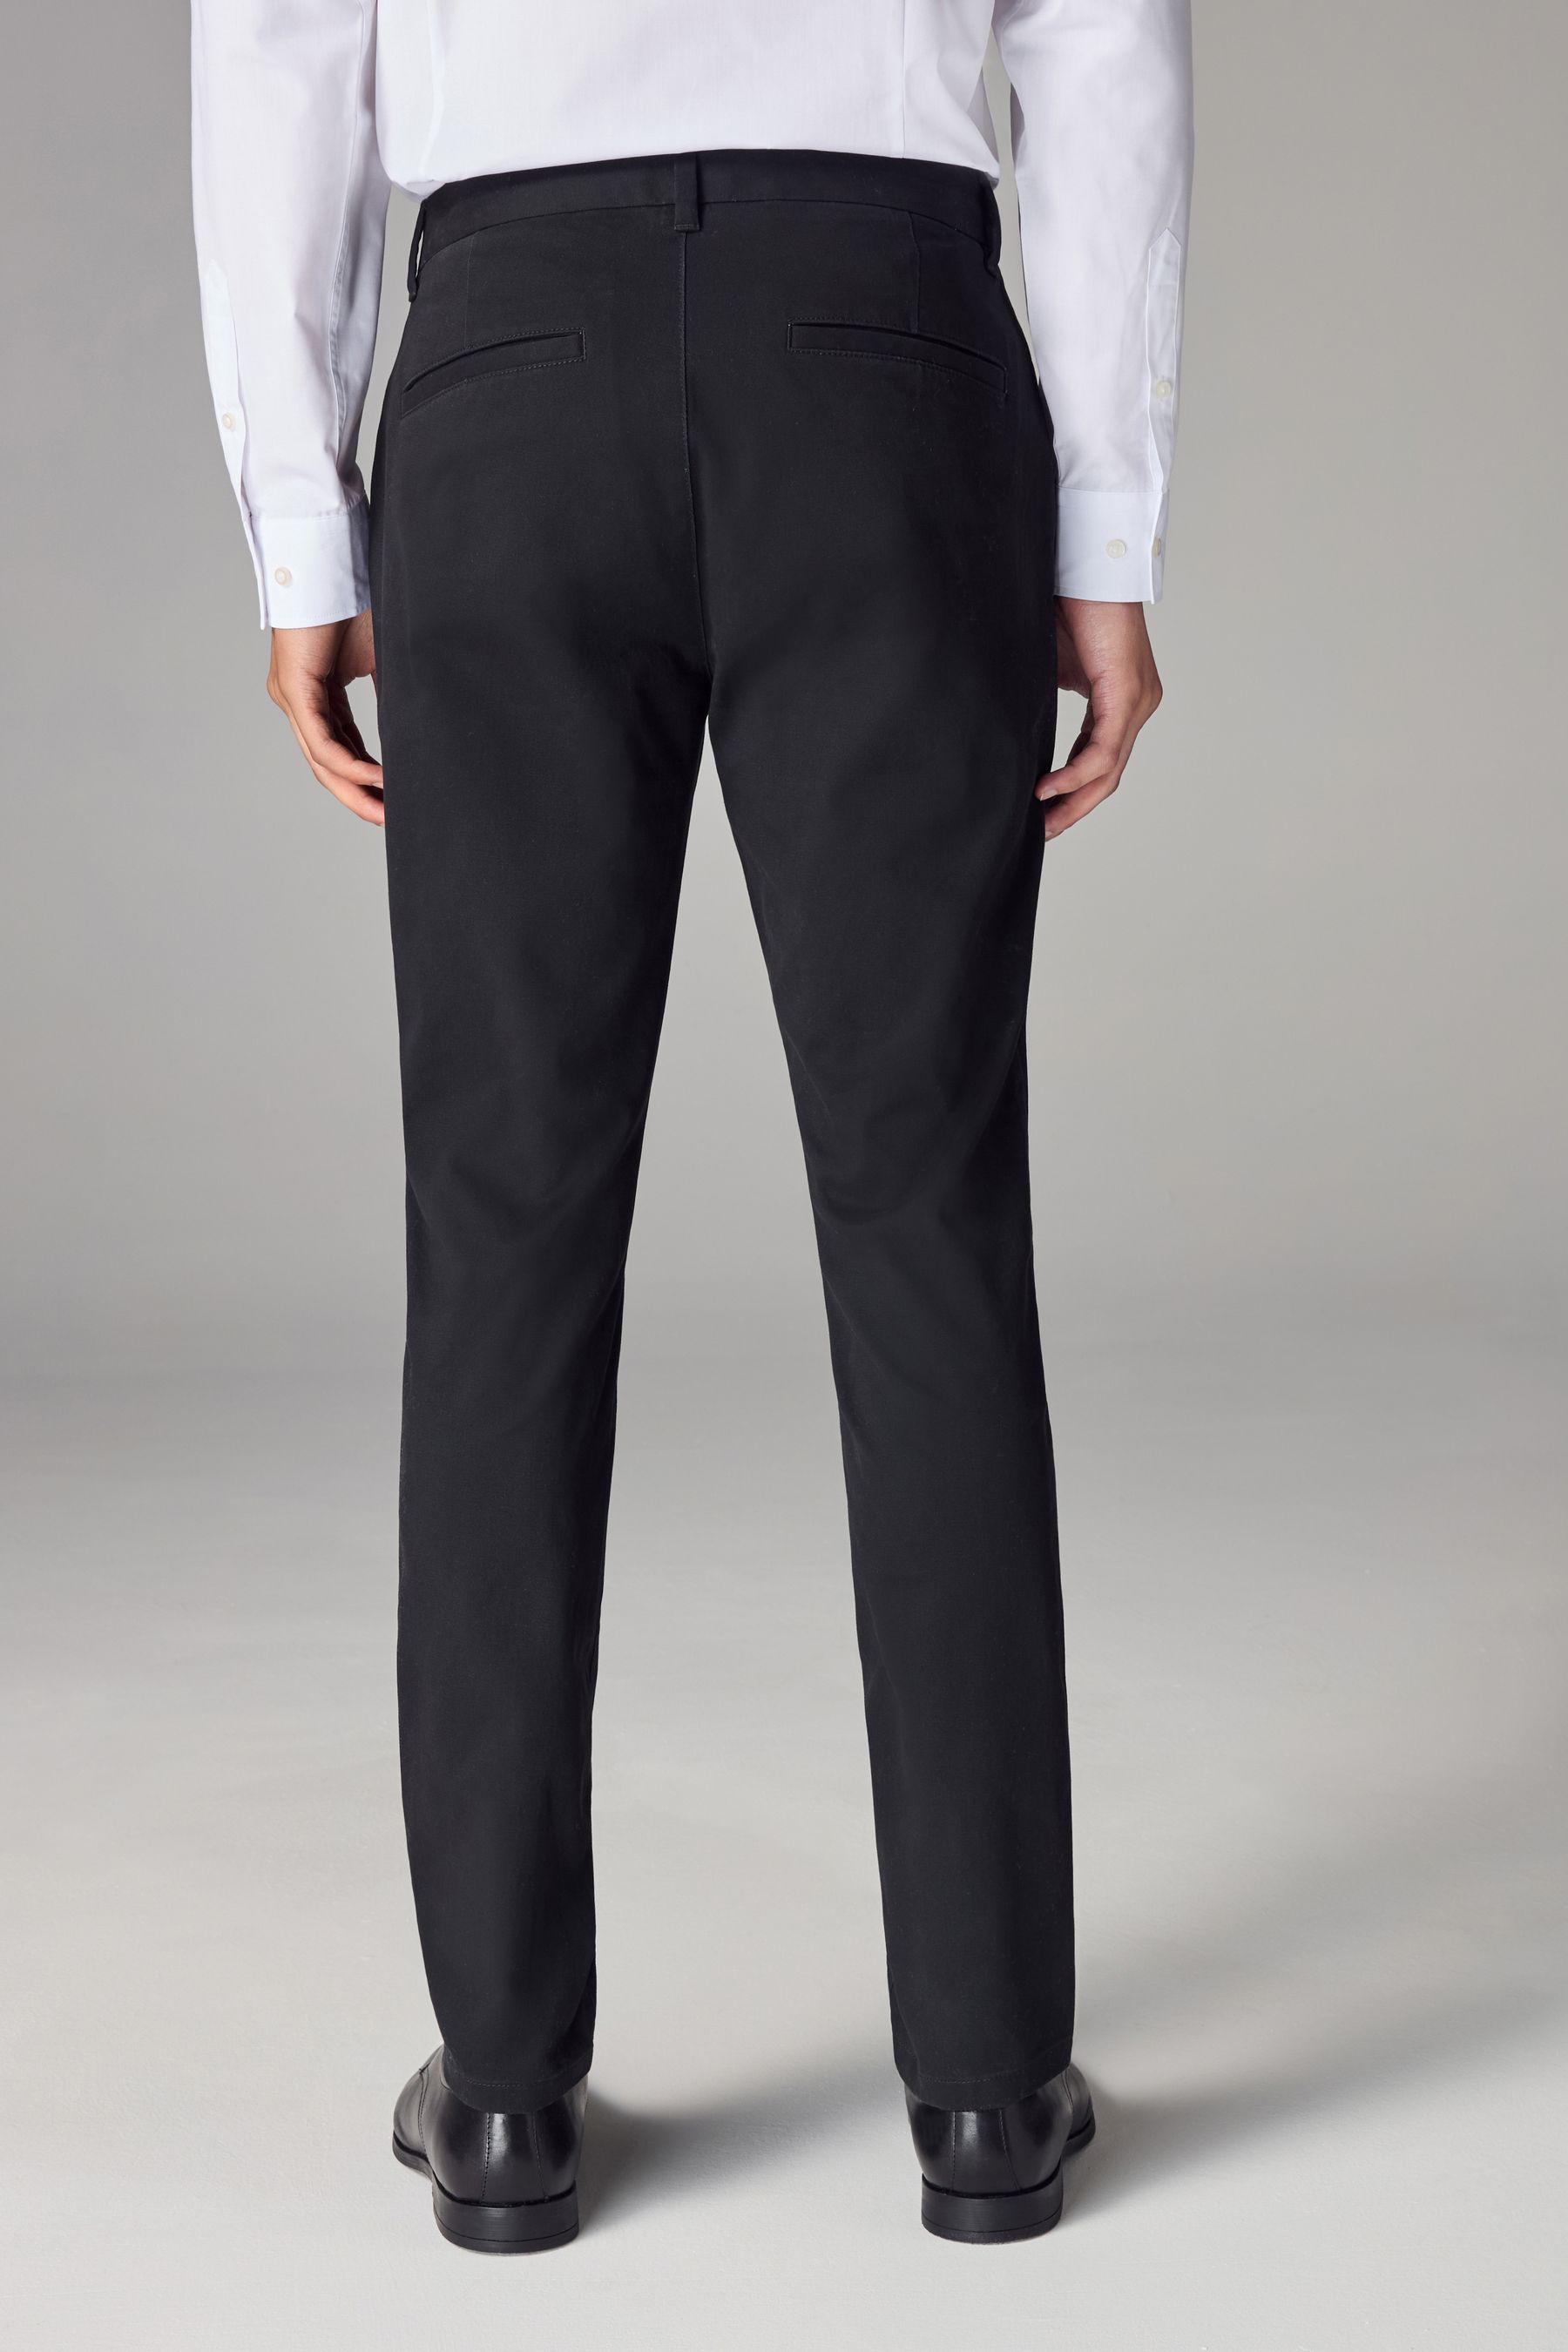 Buy Black Stretch Skinny Fit Chino Trousers from the Next UK online shop